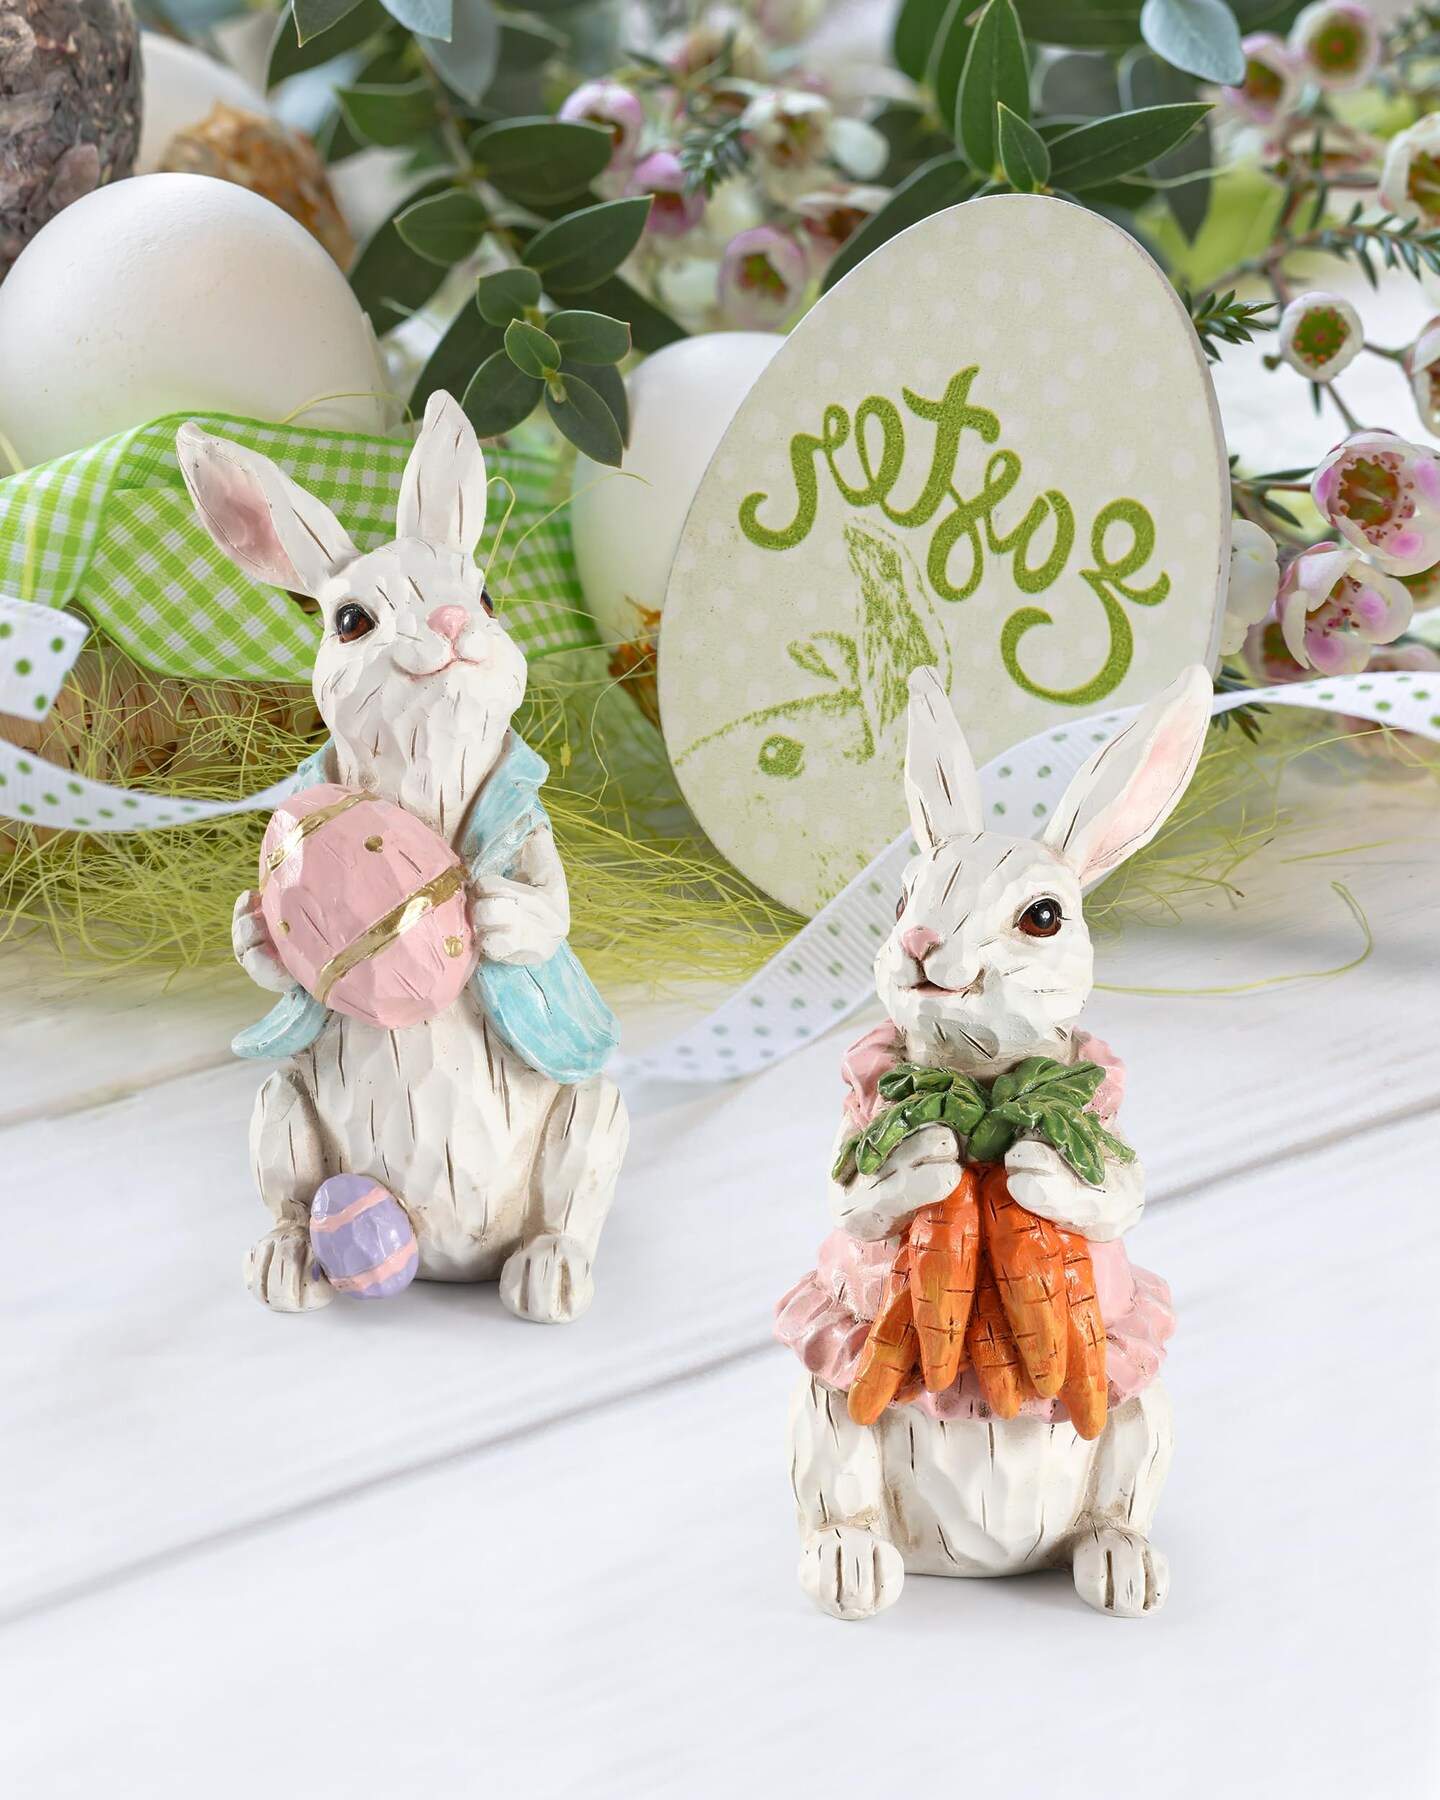 iStatue Easter Bunnies, Set of 2 Resin 5&#x27;&#x27; Bunny Figurines with Resurrection Eggs and Carrots - Hand-Painted Statue Spring Easter Decorations for The Home Decor Office Gift (Easter Bunnies)